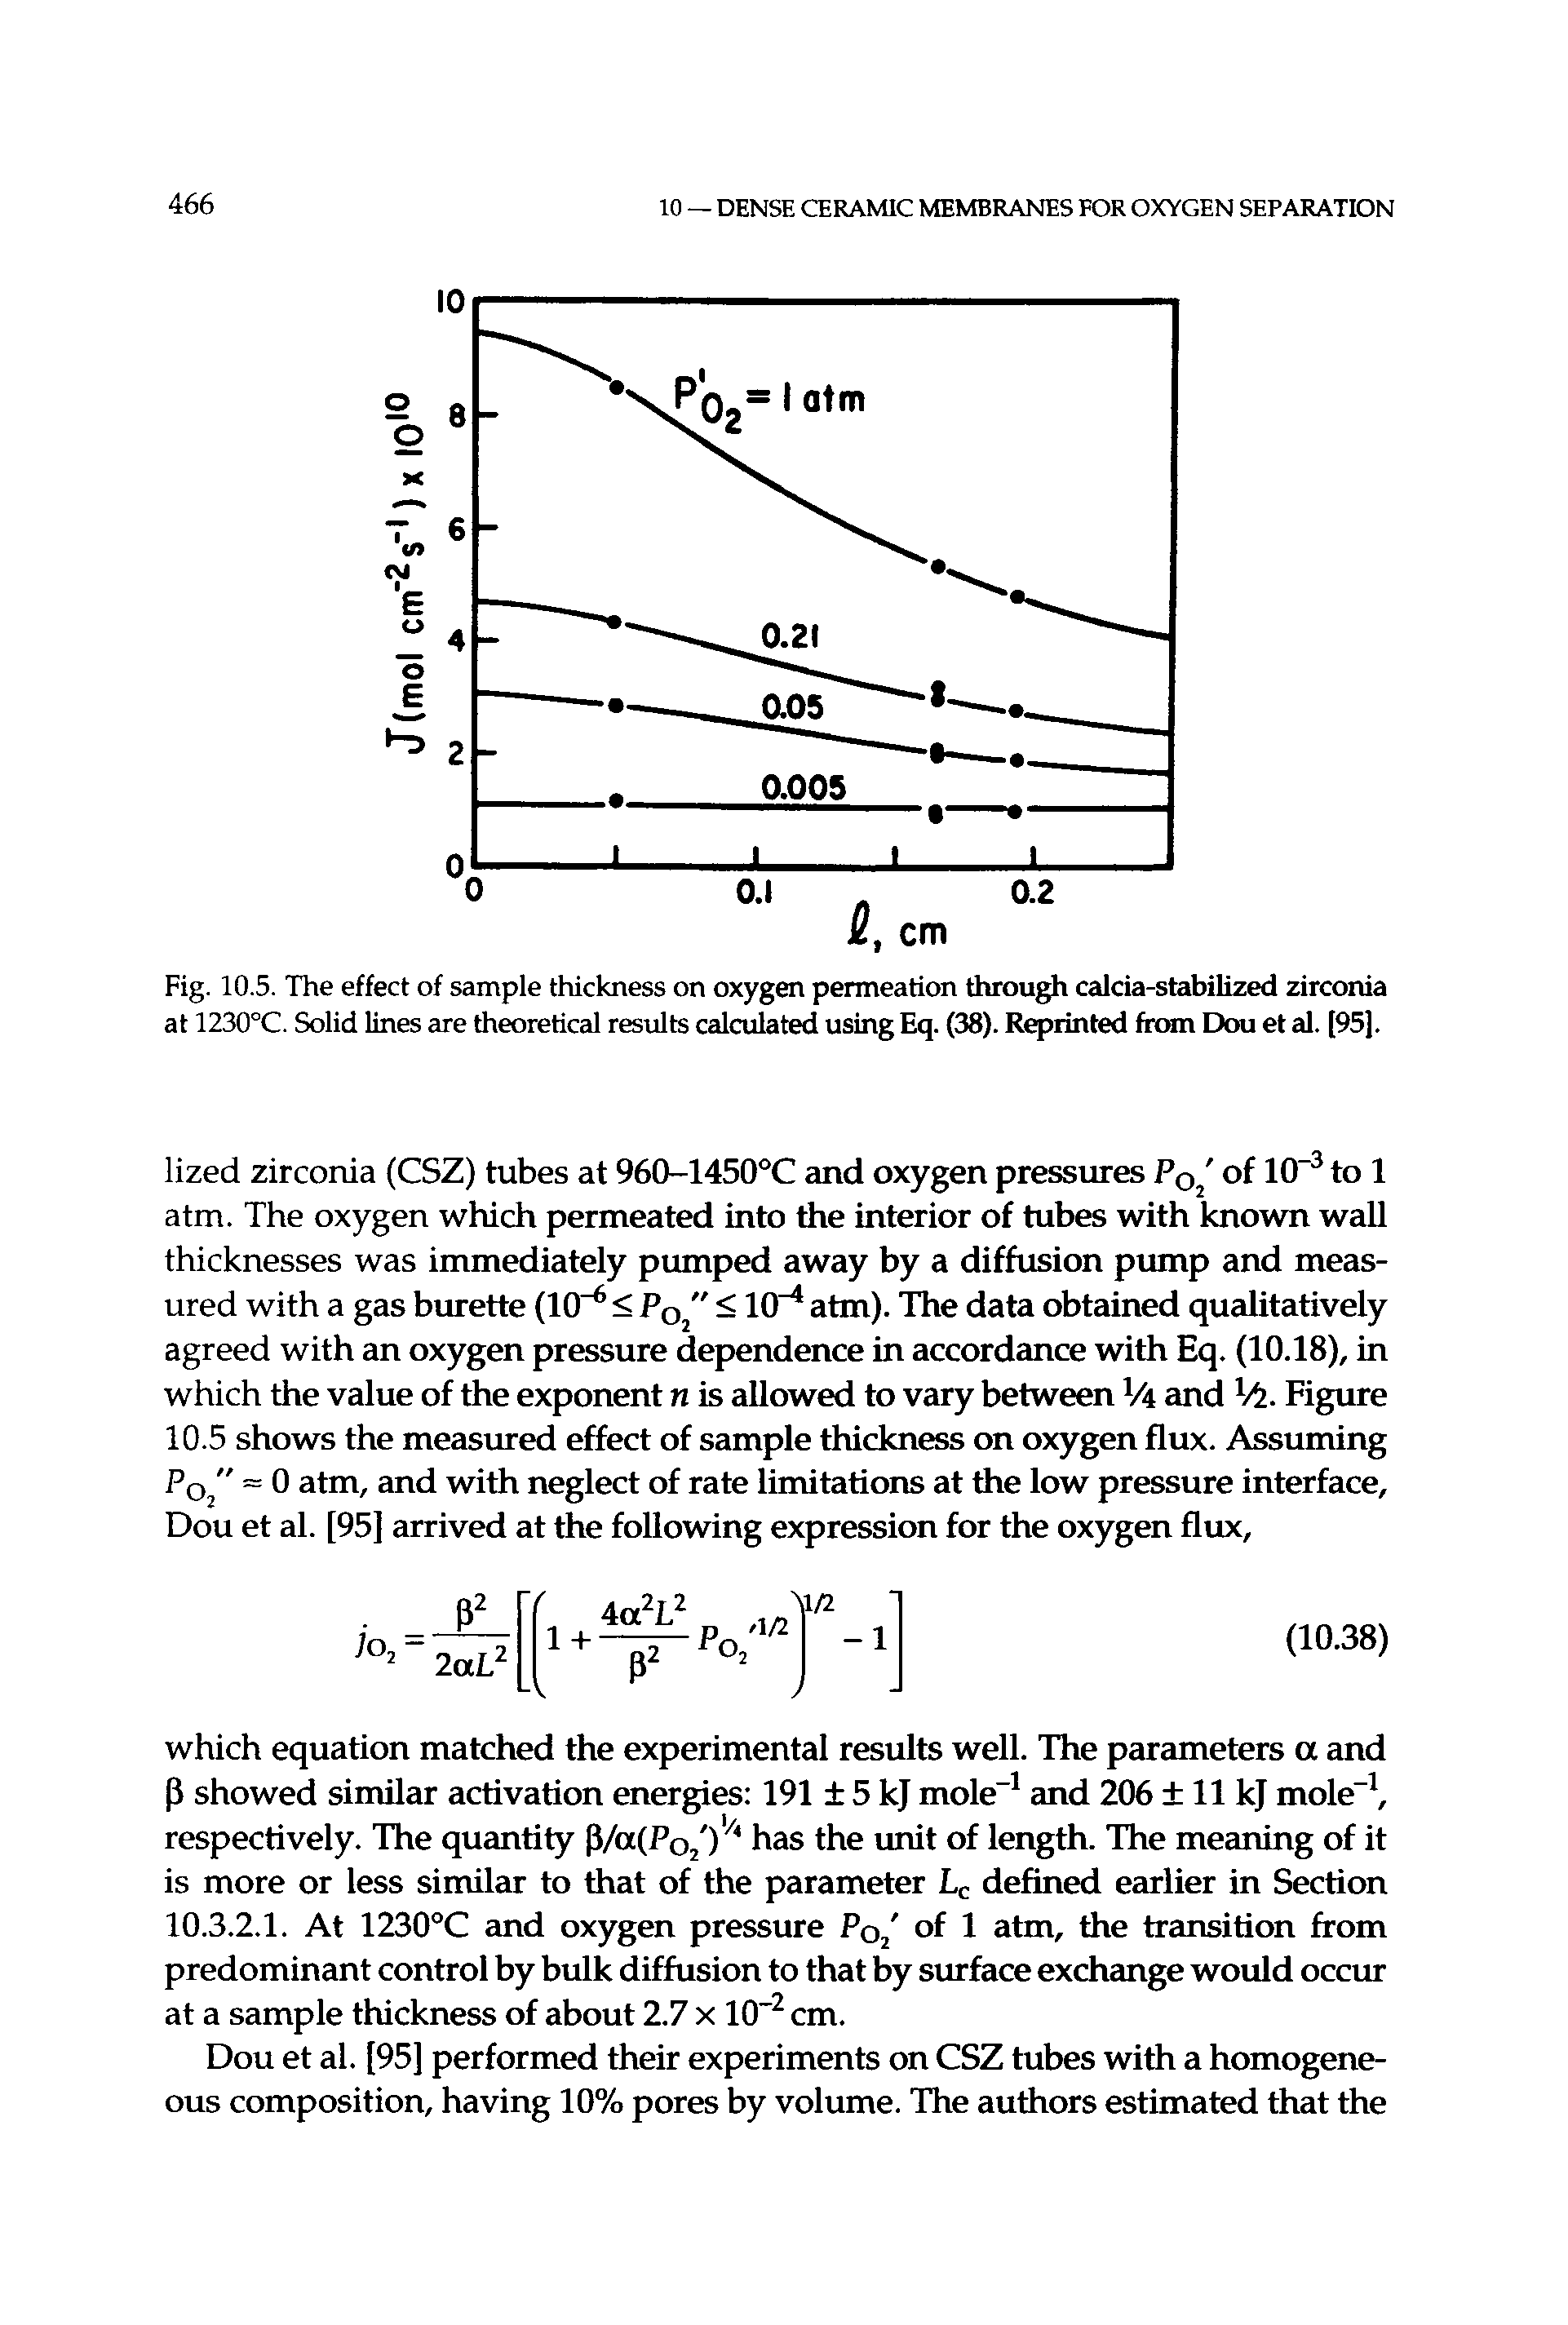 Fig. 10.5. The effect of sample thickness on oxygen permeation through calcia-stabilized zirconia at 1230°C. Solid lines are theoretical results calculated using Eq. (38). Reprinted fixMn Dou et al. [95J.